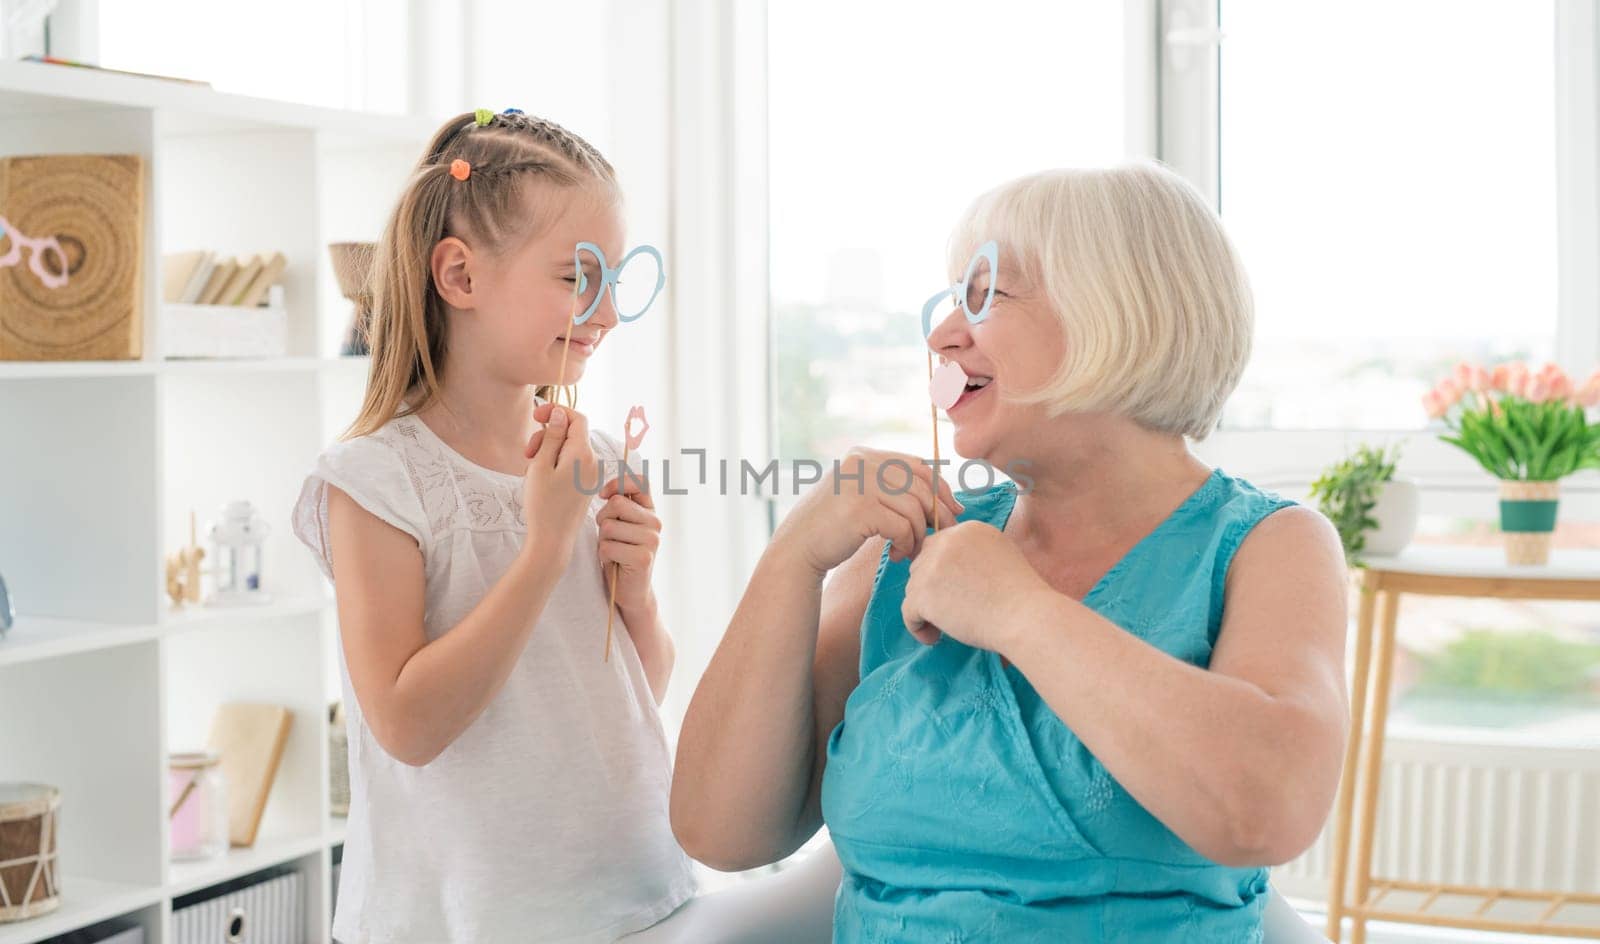 Cute granddaughter and granny holding glasses and lips on sticks in bright room